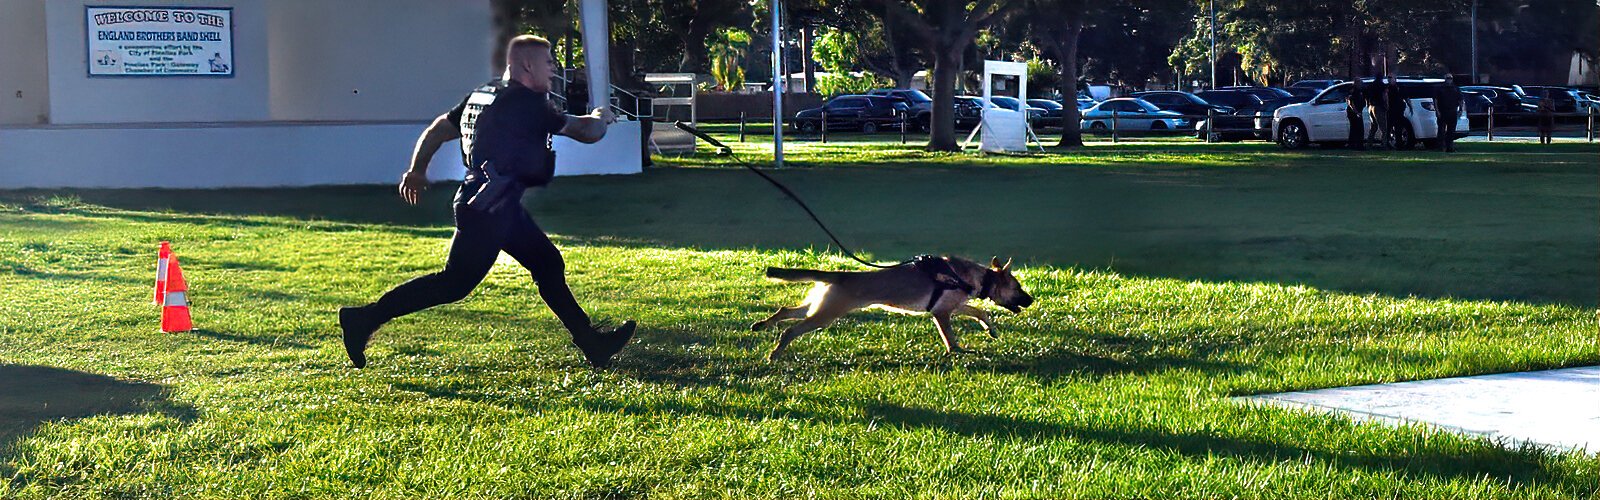 Deputy Jason Whidby demonstrates a chase with his K-9 Gunther, highlighting the skills received during training.